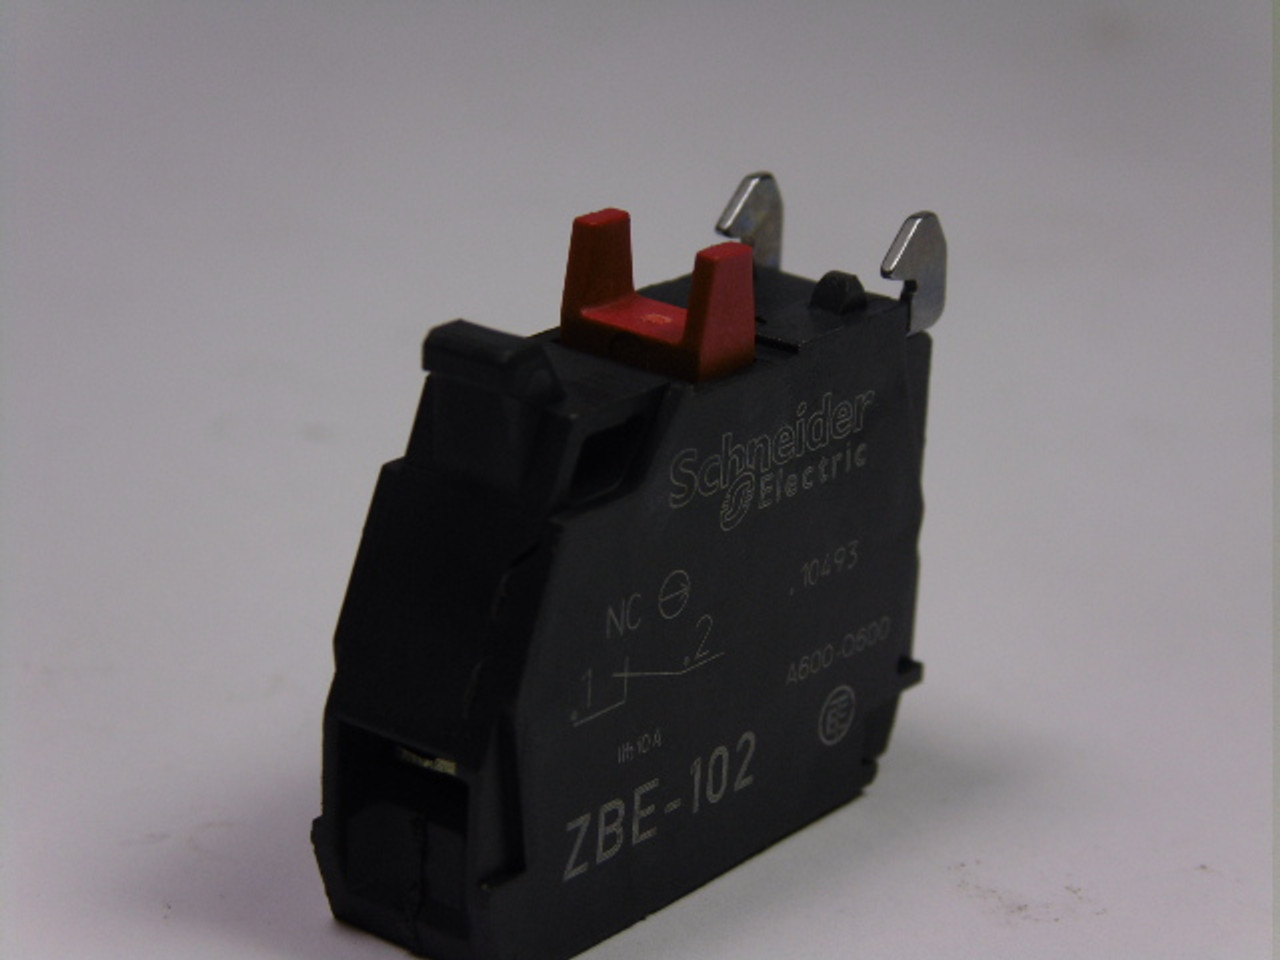 Schneider Electric ZBE-102 Contact Block USED